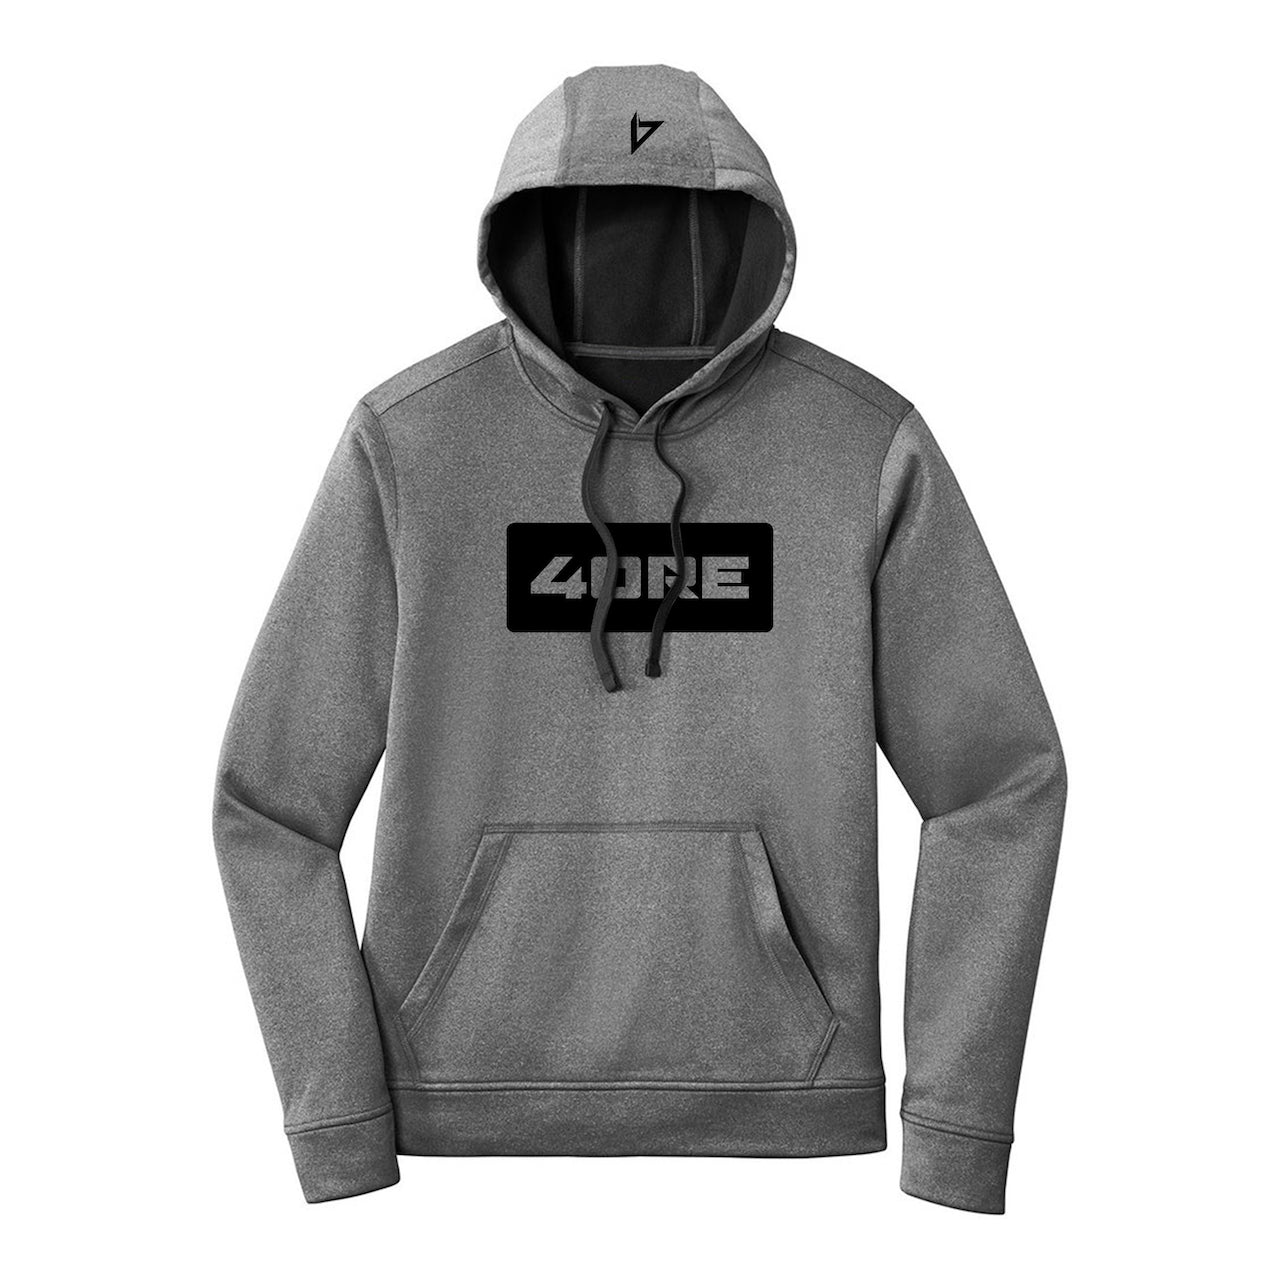 4ORE TOUR HOODIE LIMITED NUTRITION 4ORE – EDITION [GRAY